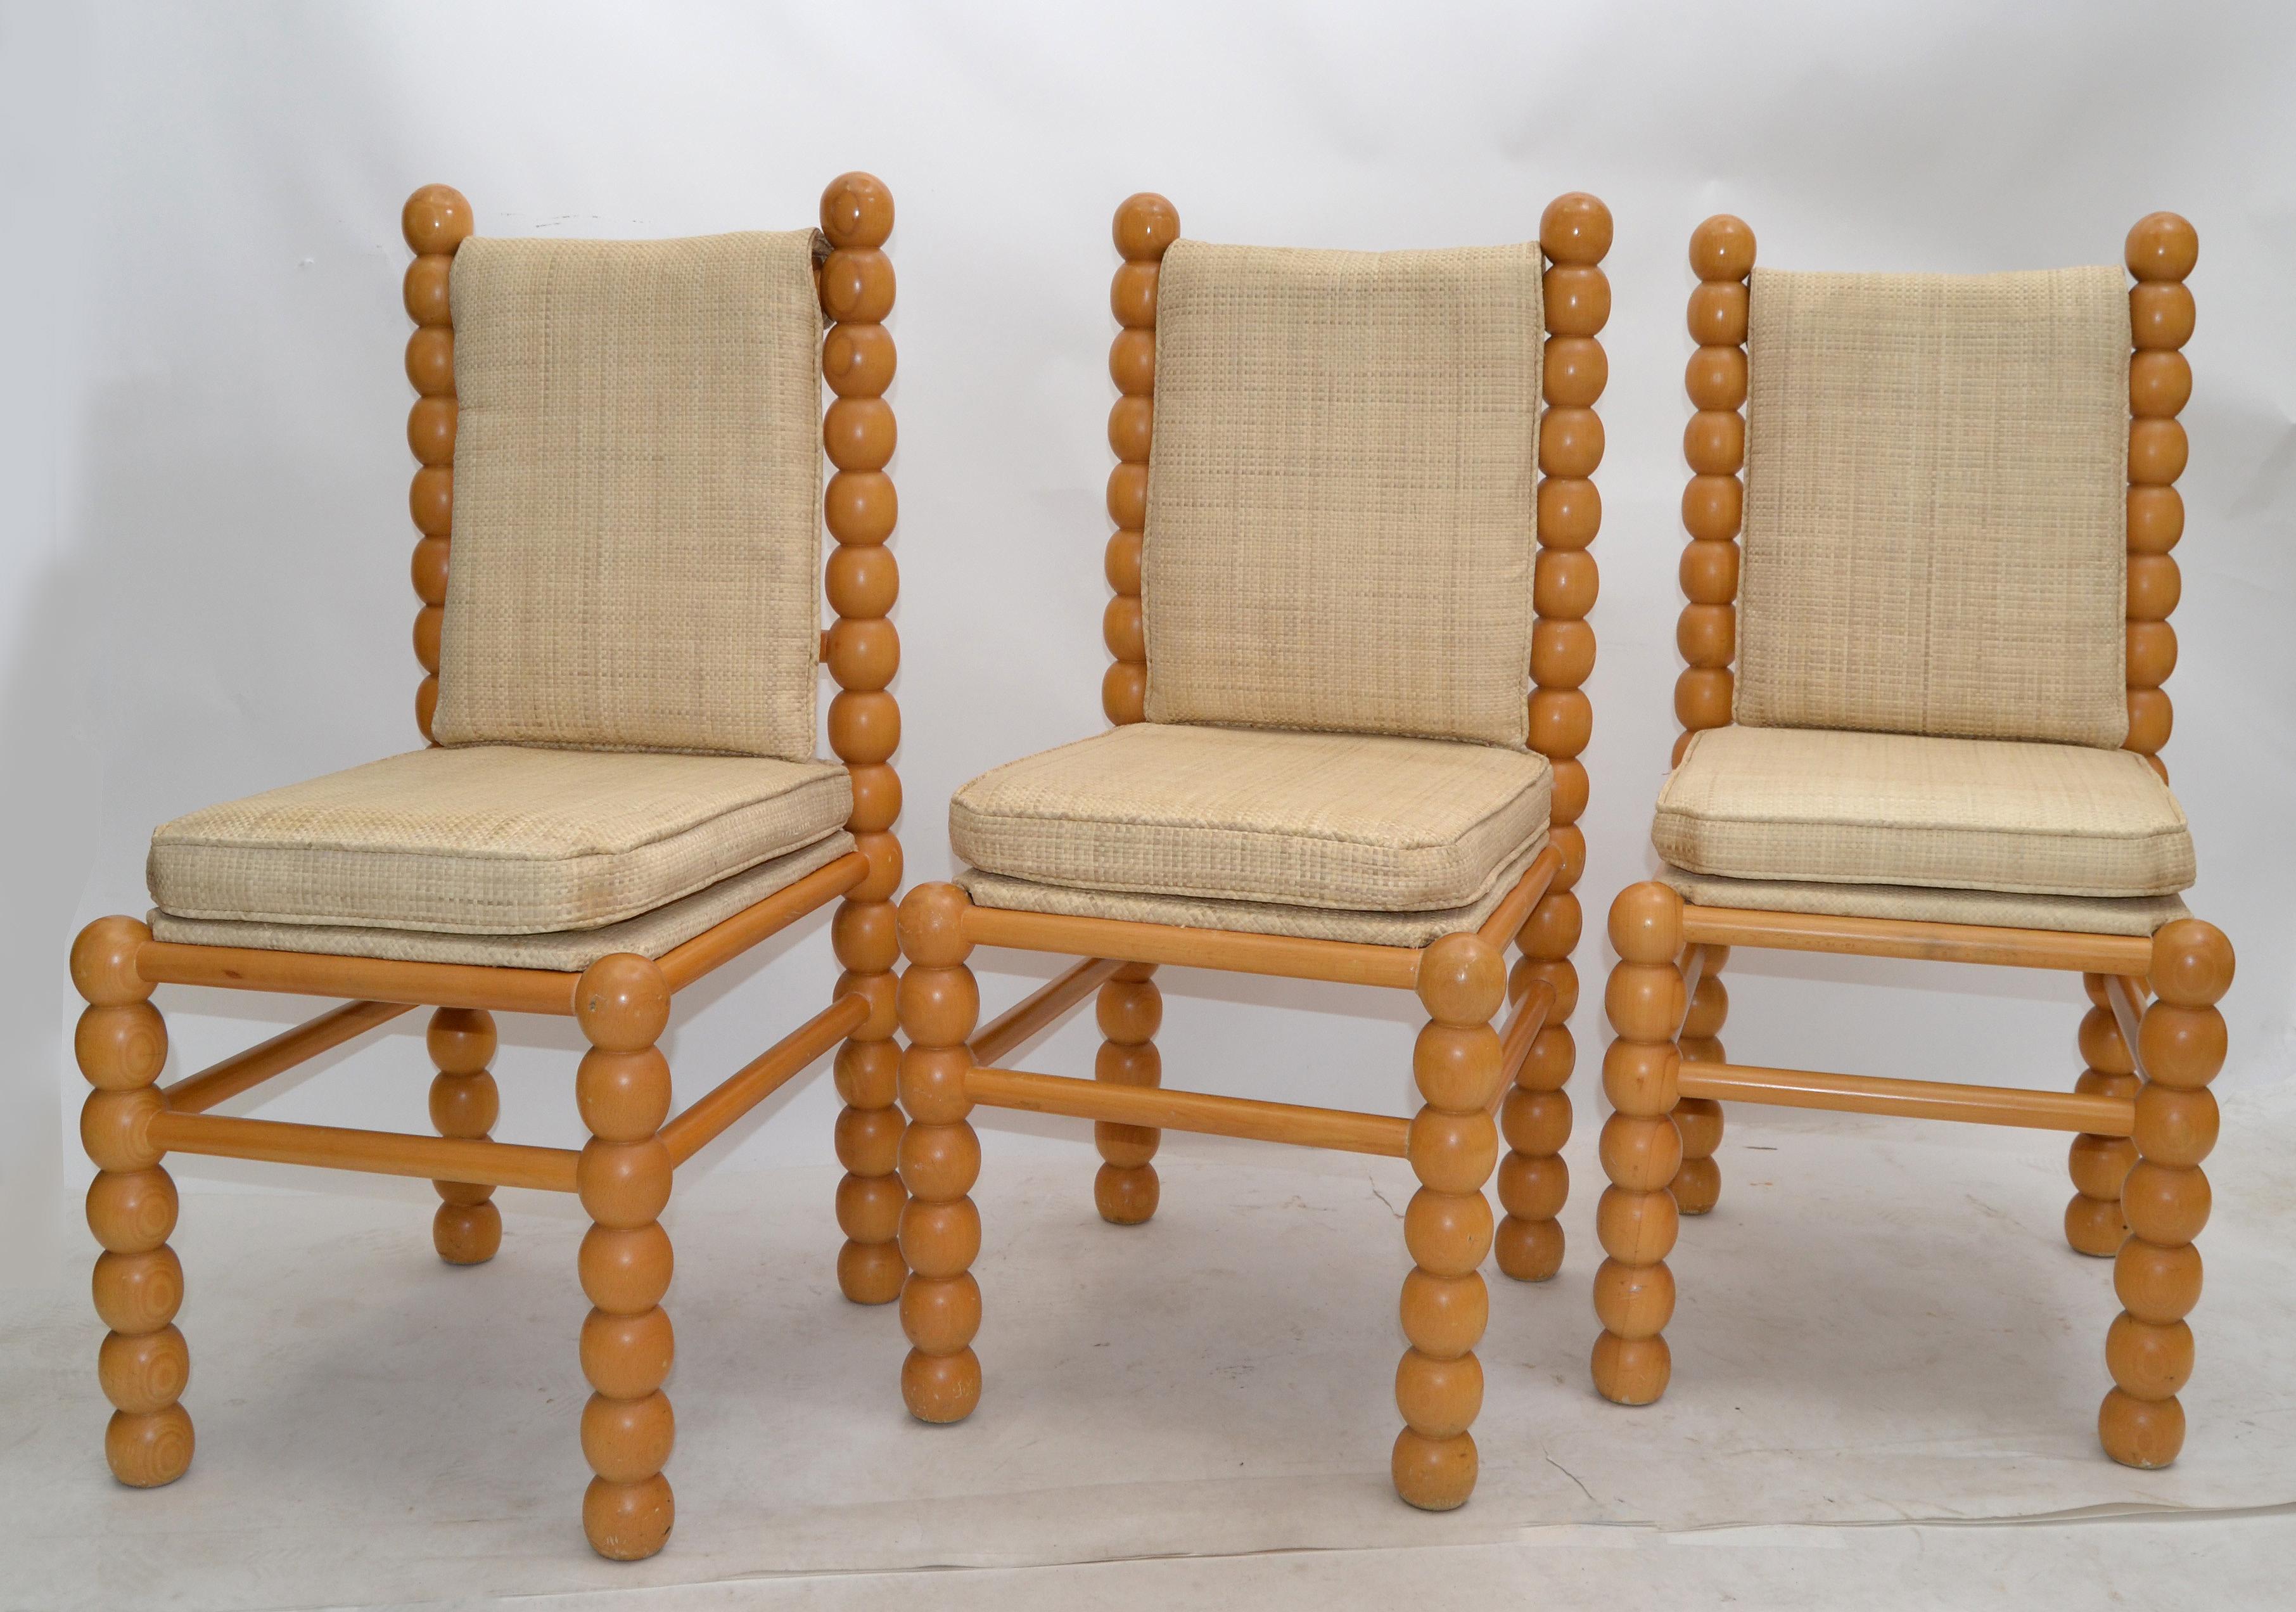 Three Mid-Century Modern side chairs or dining chairs from the late 1970s made in America.
Turned wooden frames and with a pale beige jute upholstery.
The chairs are super comfortable and great for a small space. 
  